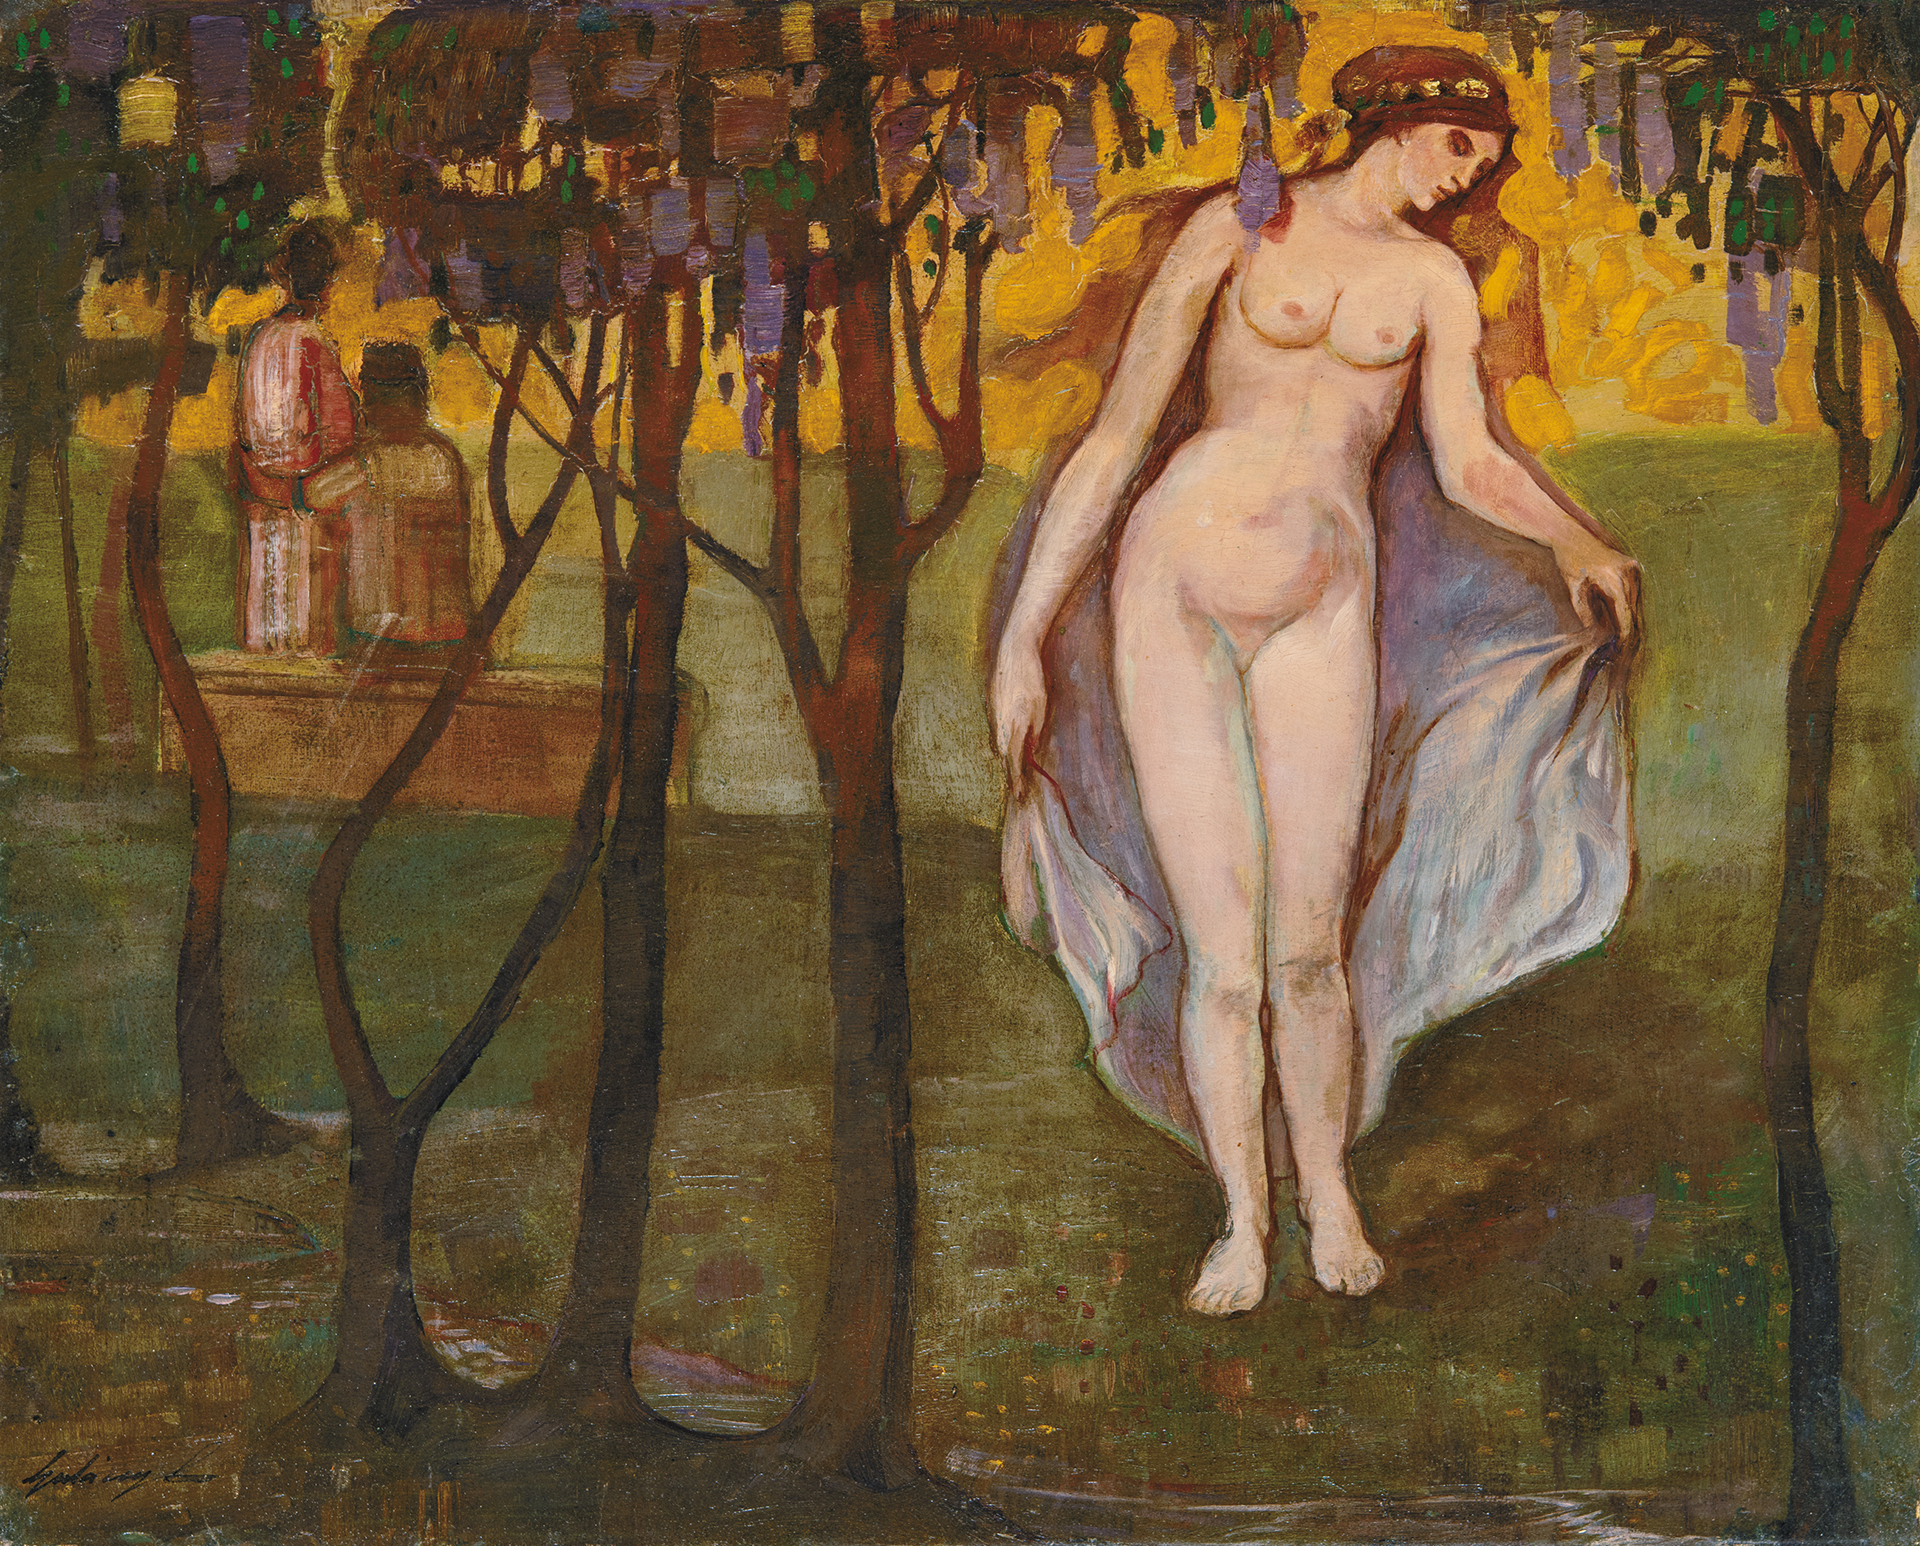 Gulácsy Lajos (1882-1932) Dew (Female Nude among the Trees), 1904-1905